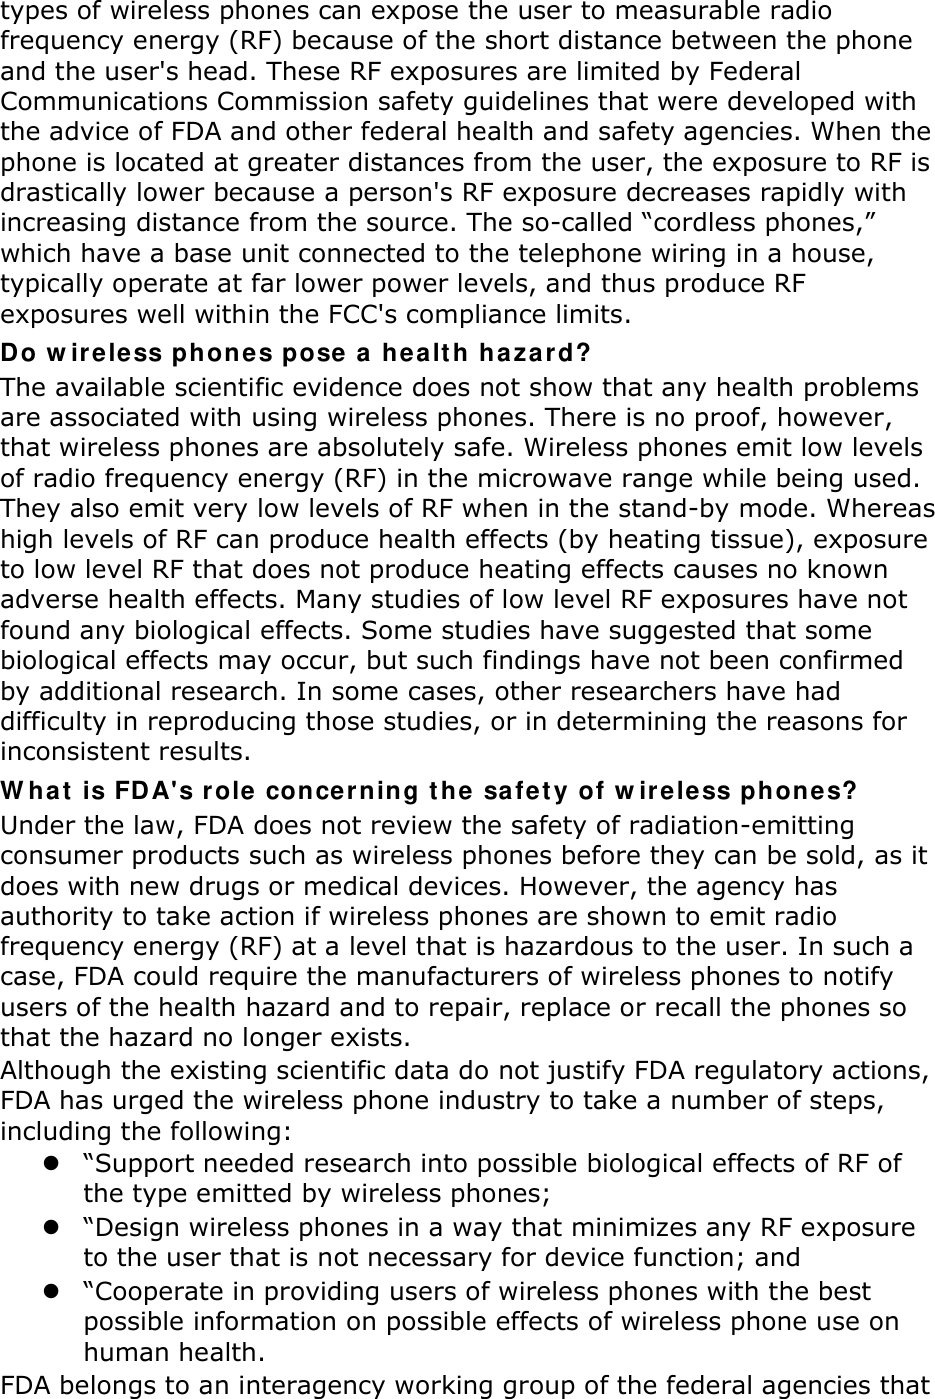 types of wireless phones can expose the user to measurable radio frequency energy (RF) because of the short distance between the phone and the user&apos;s head. These RF exposures are limited by Federal Communications Commission safety guidelines that were developed with the advice of FDA and other federal health and safety agencies. When the phone is located at greater distances from the user, the exposure to RF is drastically lower because a person&apos;s RF exposure decreases rapidly with increasing distance from the source. The so-called “cordless phones,” which have a base unit connected to the telephone wiring in a house, typically operate at far lower power levels, and thus produce RF exposures well within the FCC&apos;s compliance limits. Do w ir eless phones pose a  hea lt h h aza rd? The available scientific evidence does not show that any health problems are associated with using wireless phones. There is no proof, however, that wireless phones are absolutely safe. Wireless phones emit low levels of radio frequency energy (RF) in the microwave range while being used. They also emit very low levels of RF when in the stand-by mode. Whereas high levels of RF can produce health effects (by heating tissue), exposure to low level RF that does not produce heating effects causes no known adverse health effects. Many studies of low level RF exposures have not found any biological effects. Some studies have suggested that some biological effects may occur, but such findings have not been confirmed by additional research. In some cases, other researchers have had difficulty in reproducing those studies, or in determining the reasons for inconsistent results. W hat  is FDA&apos;s role concerning t he  sa fety of w ir eless phones? Under the law, FDA does not review the safety of radiation-emitting consumer products such as wireless phones before they can be sold, as it does with new drugs or medical devices. However, the agency has authority to take action if wireless phones are shown to emit radio frequency energy (RF) at a level that is hazardous to the user. In such a case, FDA could require the manufacturers of wireless phones to notify users of the health hazard and to repair, replace or recall the phones so that the hazard no longer exists. Although the existing scientific data do not justify FDA regulatory actions, FDA has urged the wireless phone industry to take a number of steps, including the following:  “Support needed research into possible biological effects of RF of the type emitted by wireless phones;  “Design wireless phones in a way that minimizes any RF exposure to the user that is not necessary for device function; and  “Cooperate in providing users of wireless phones with the best possible information on possible effects of wireless phone use on human health. FDA belongs to an interagency working group of the federal agencies that 